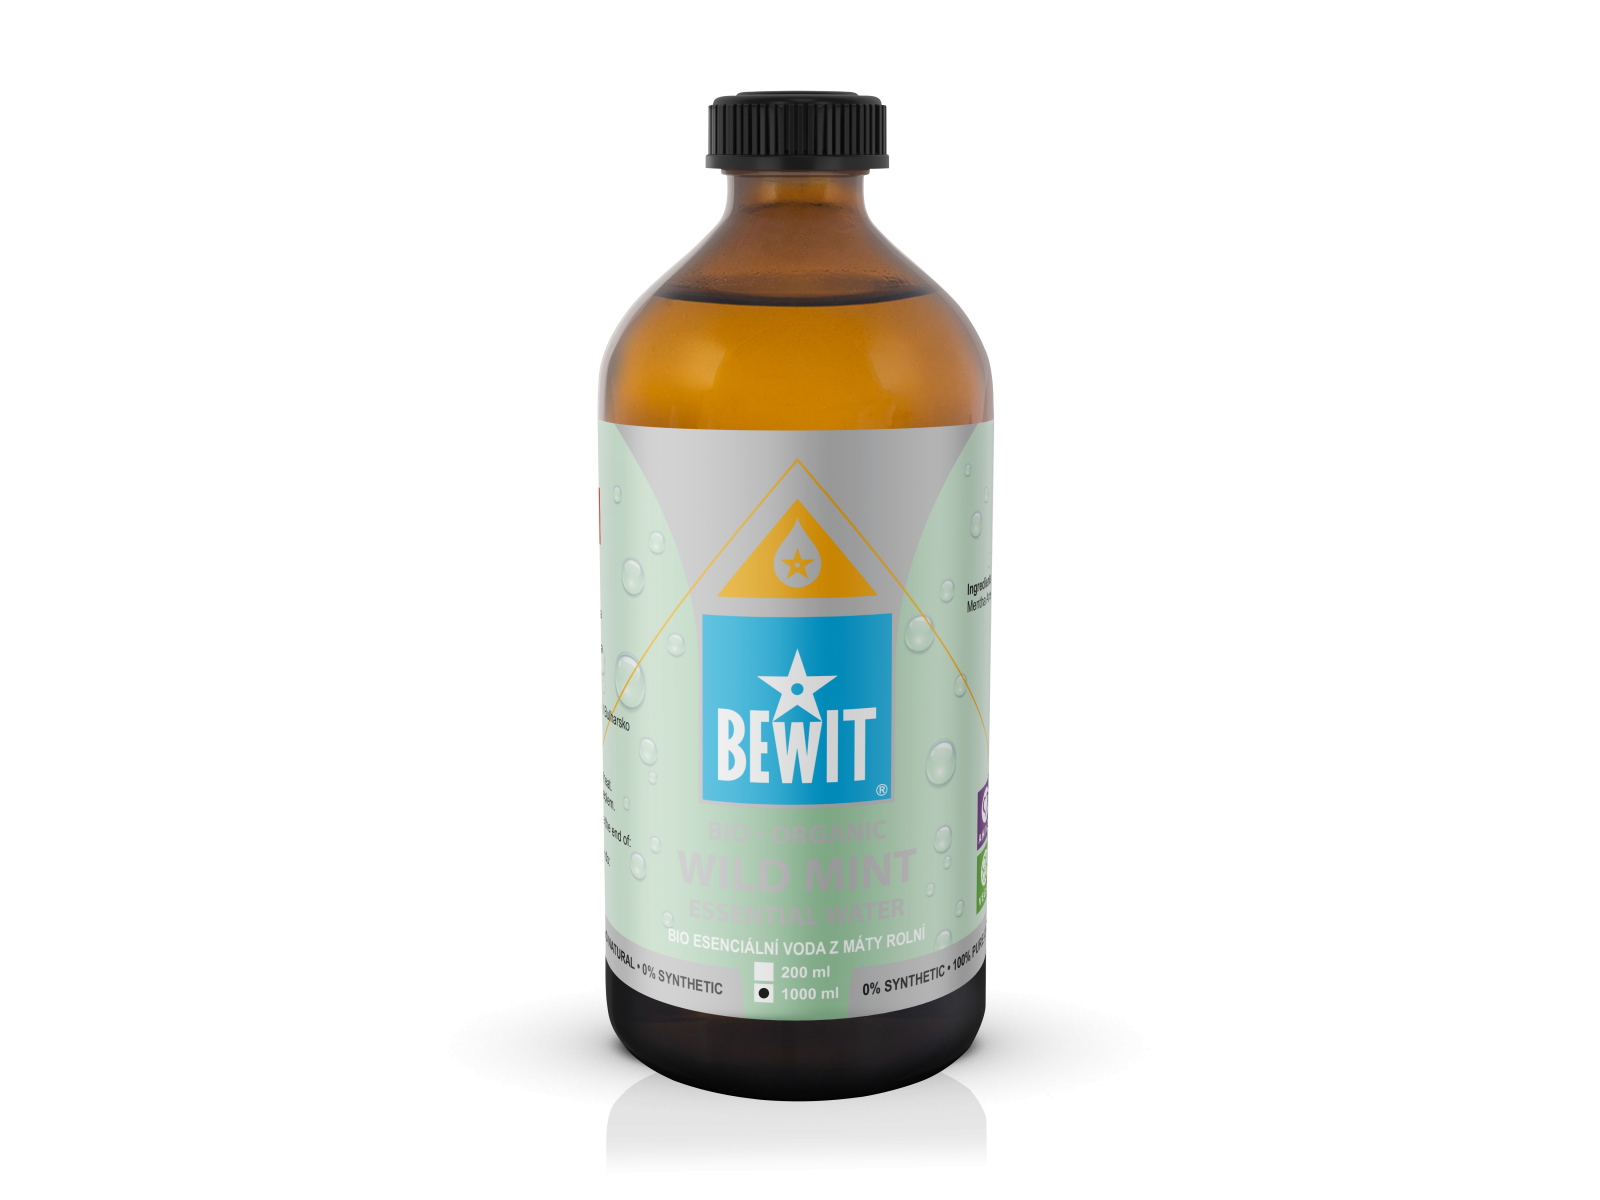 BEWIT Organic mint essential water - 100% NATURAL HYDROLYTE - 3